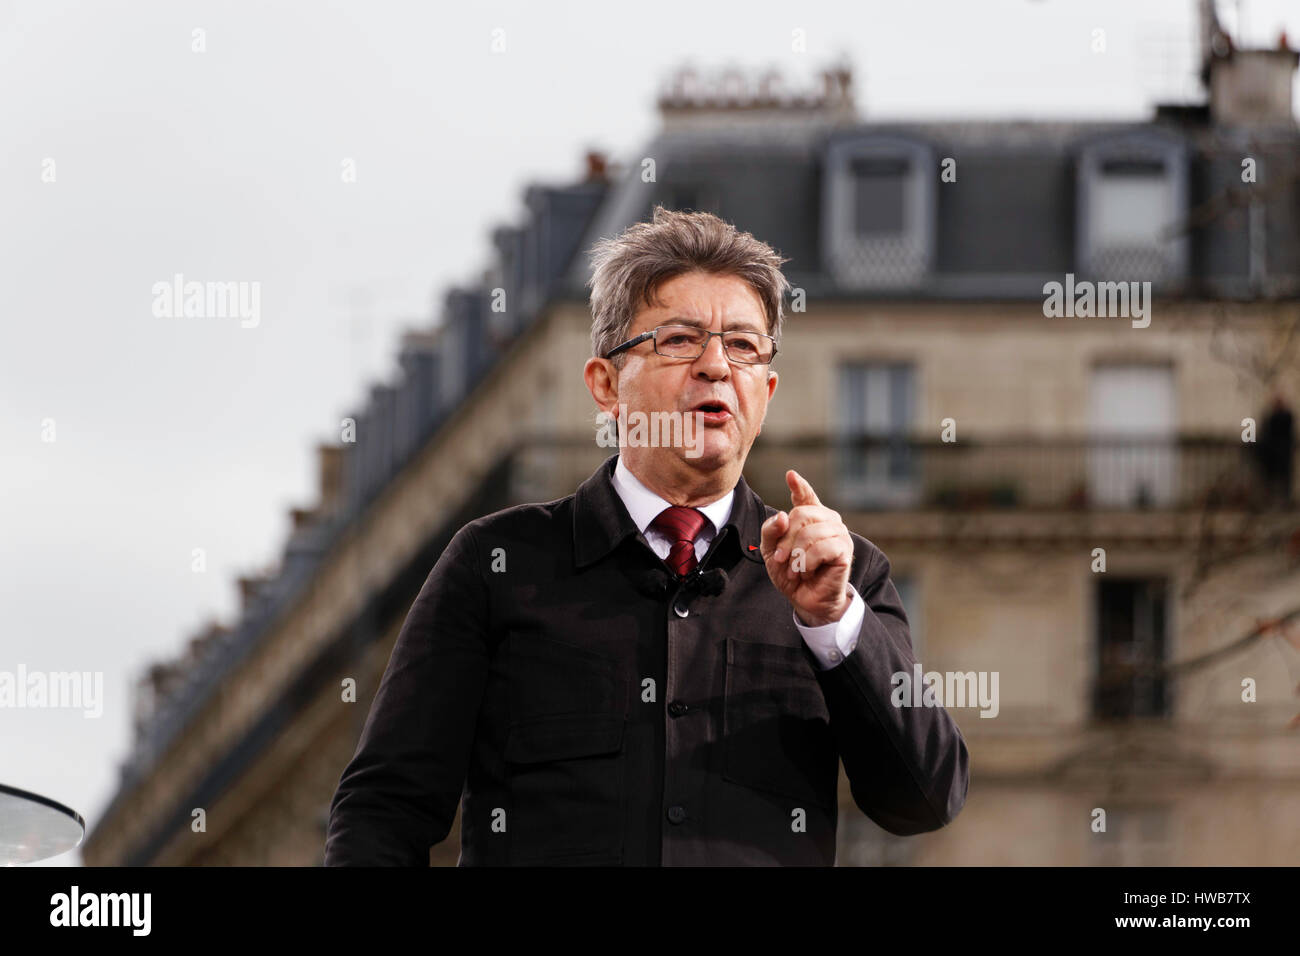 Paris, France. 18th March, 2017. Jean Luc Melenchon, presidential candidate speaks at the arrival of the parade for the 6th republic on the podium of the Place de la République in Paris, France. Credit: Bernard Menigault/Alamy Live News Stock Photo